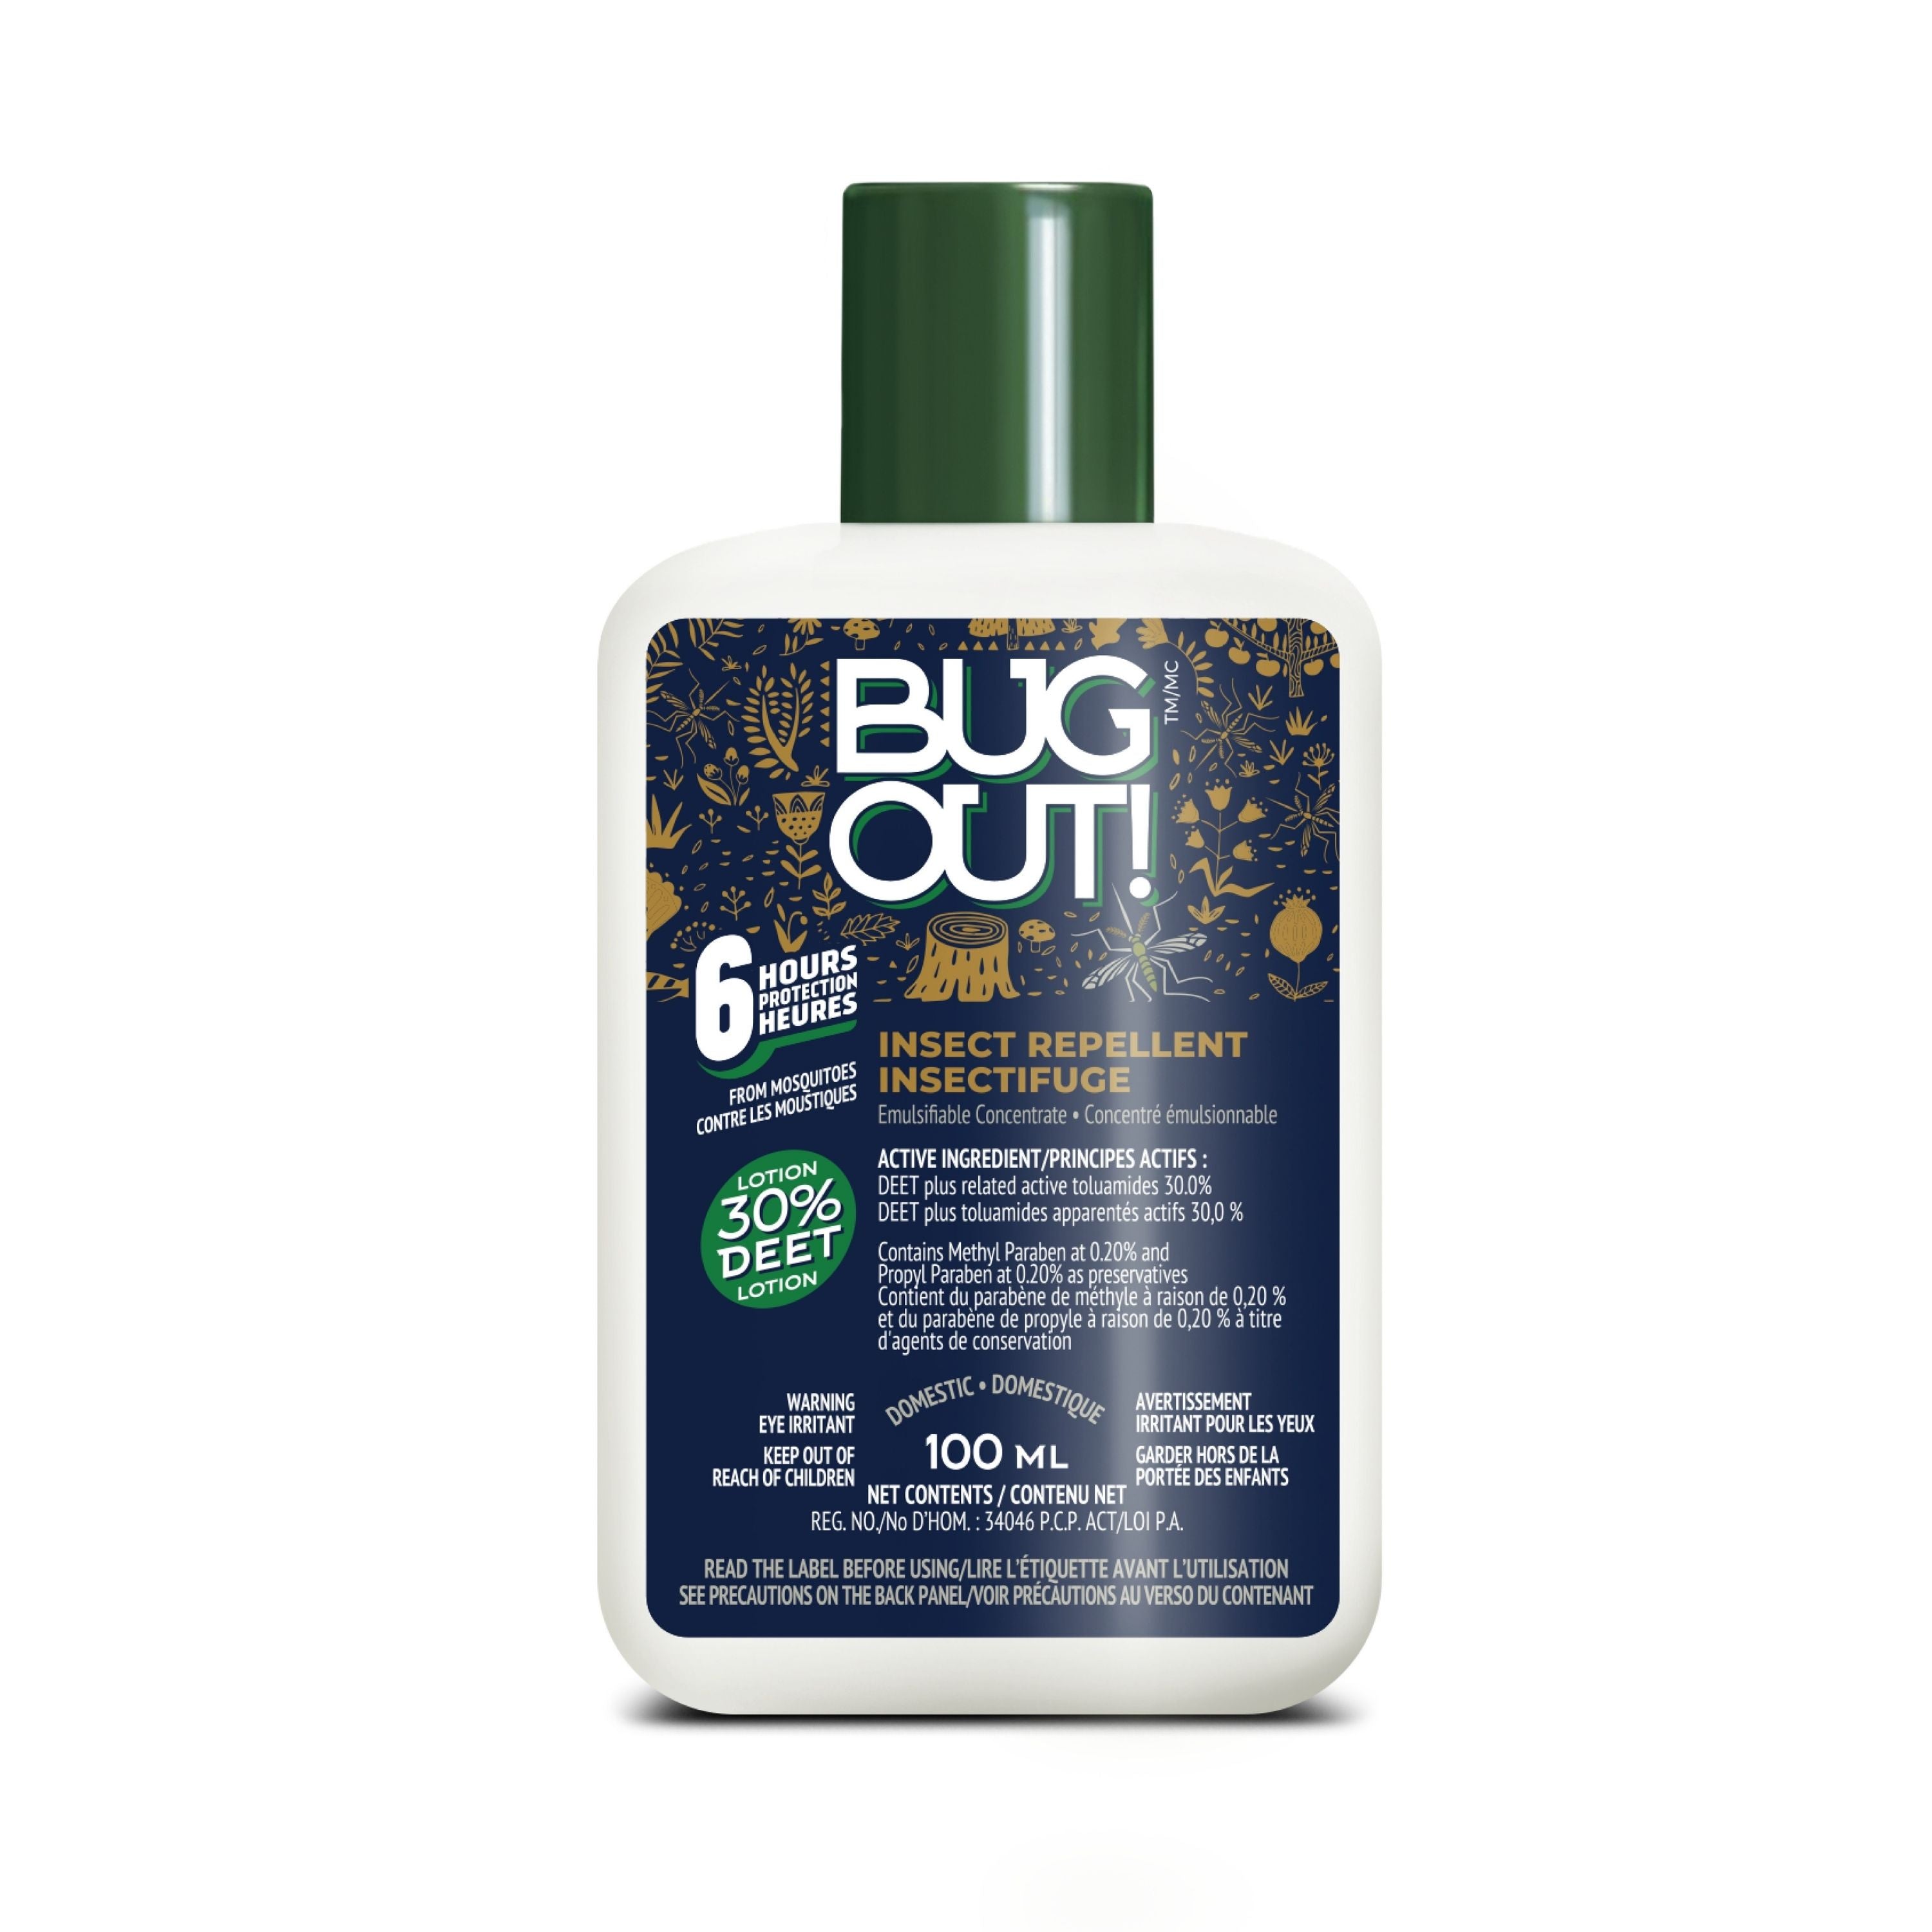 Insect repellent lotion - 30% deet